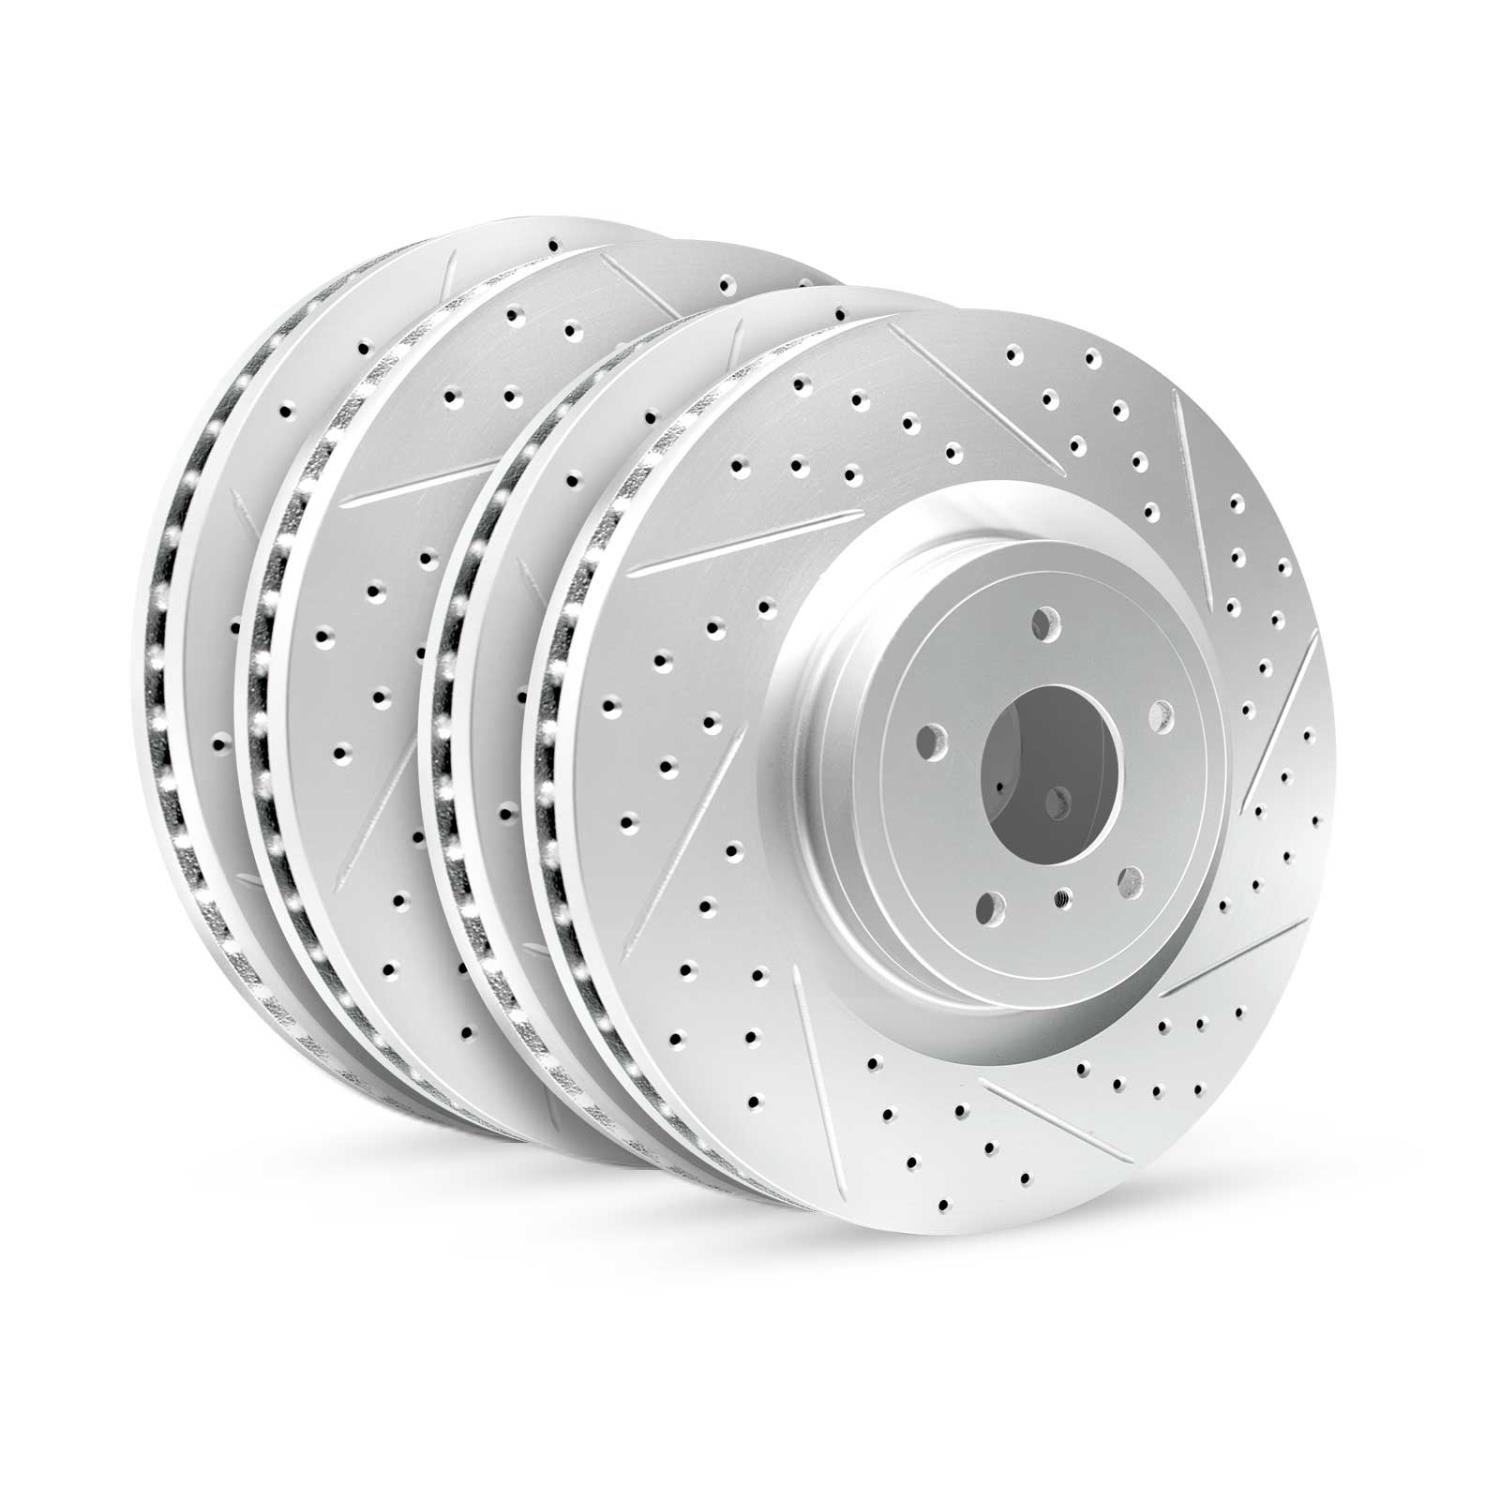 GEO-Carbon Drilled/Slotted Rotors, 1998-2002 Acura/Honda, Position: Front/Rear